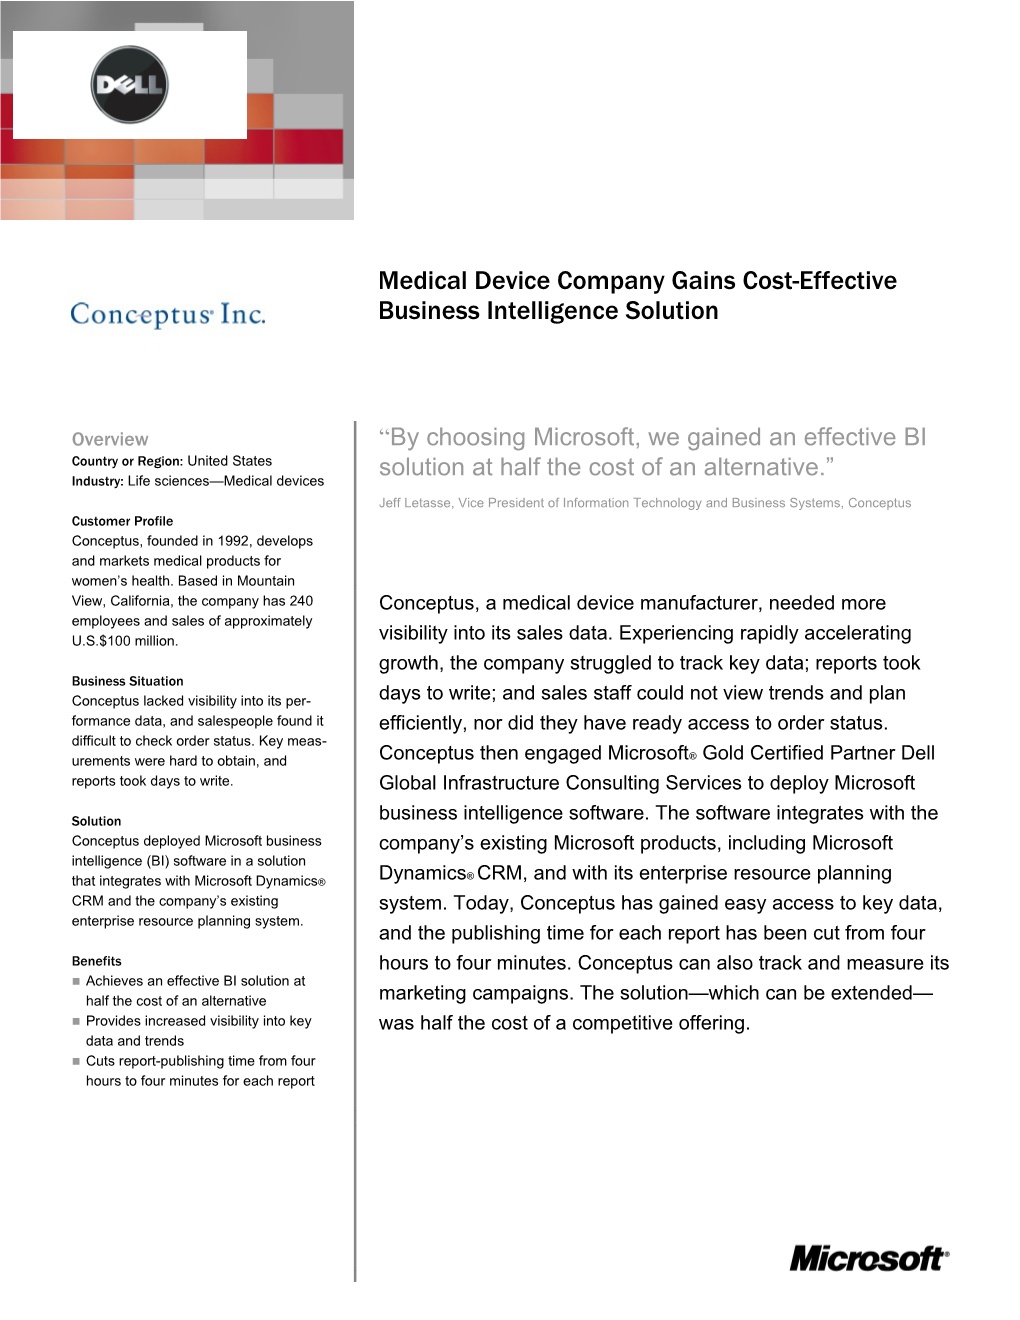 Medical Device Company Gains Cost-Effective Business Intelligence Solution